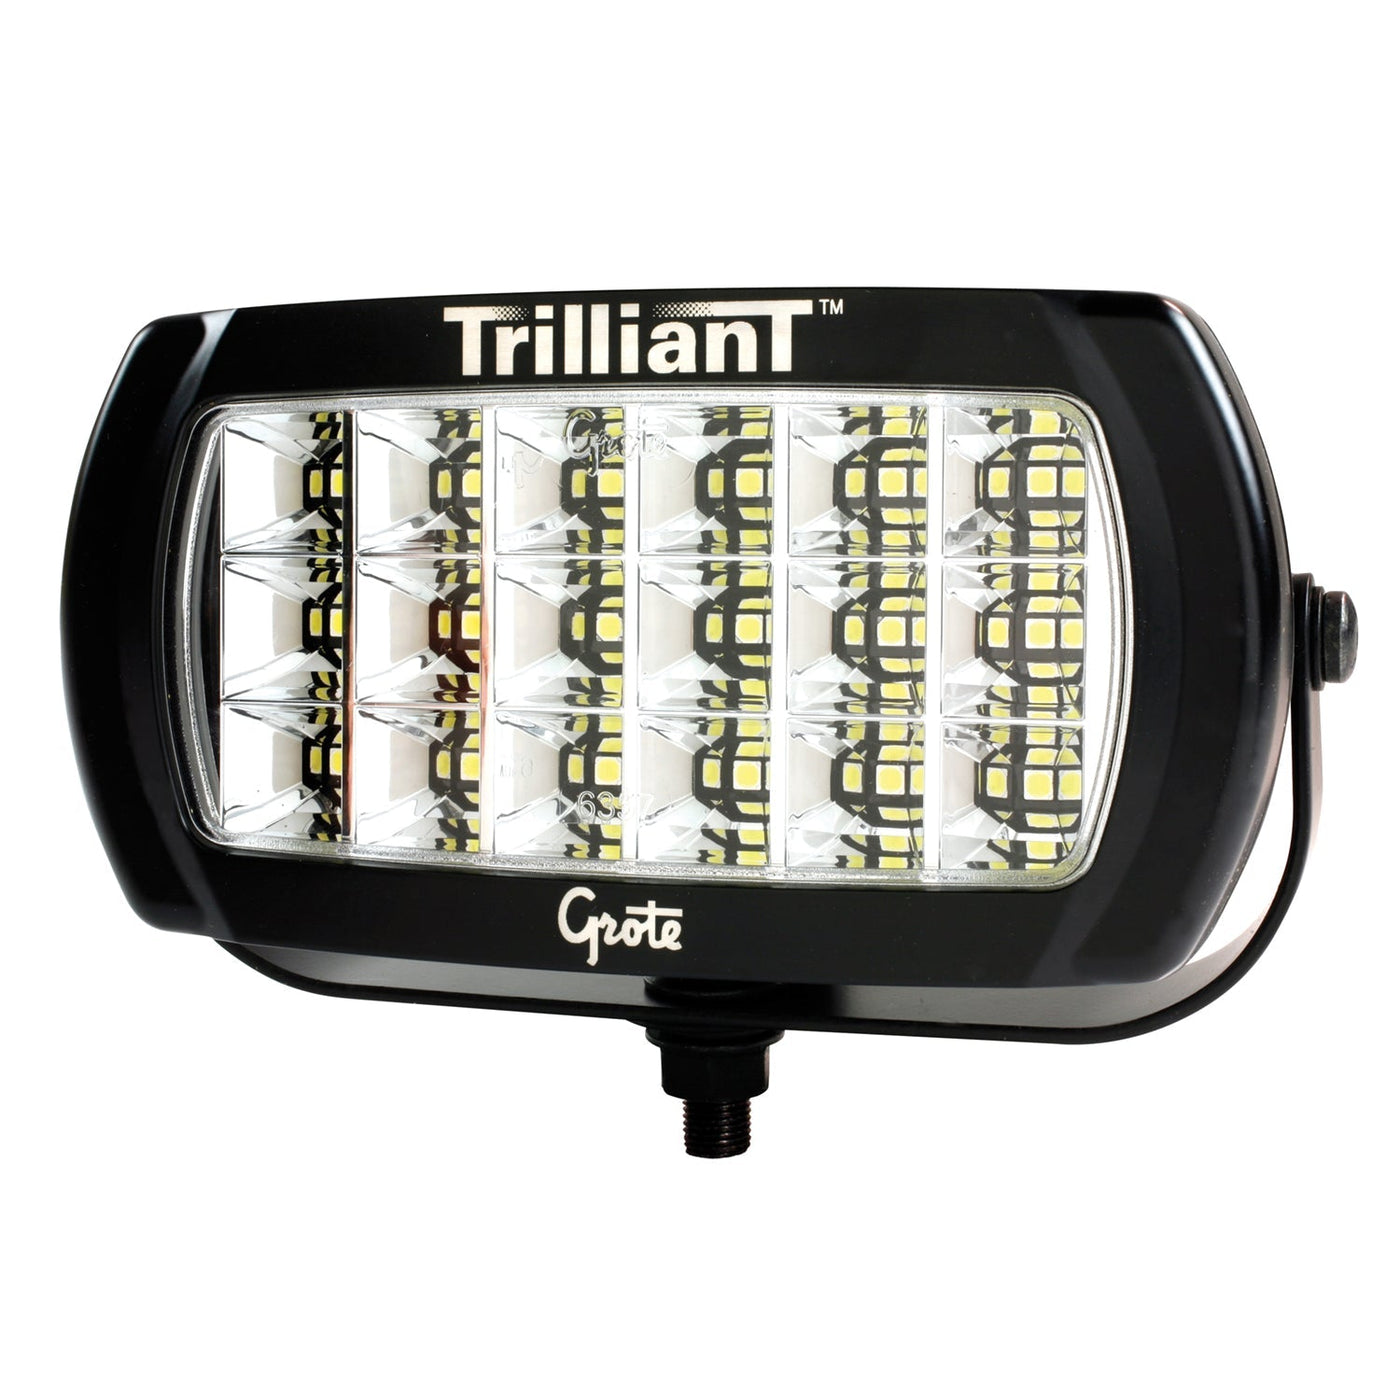 Grote Grote - 089373150680 - Lighting, LED Pattern, Flood Lamp, Forward Work W/Reflector Trilliant